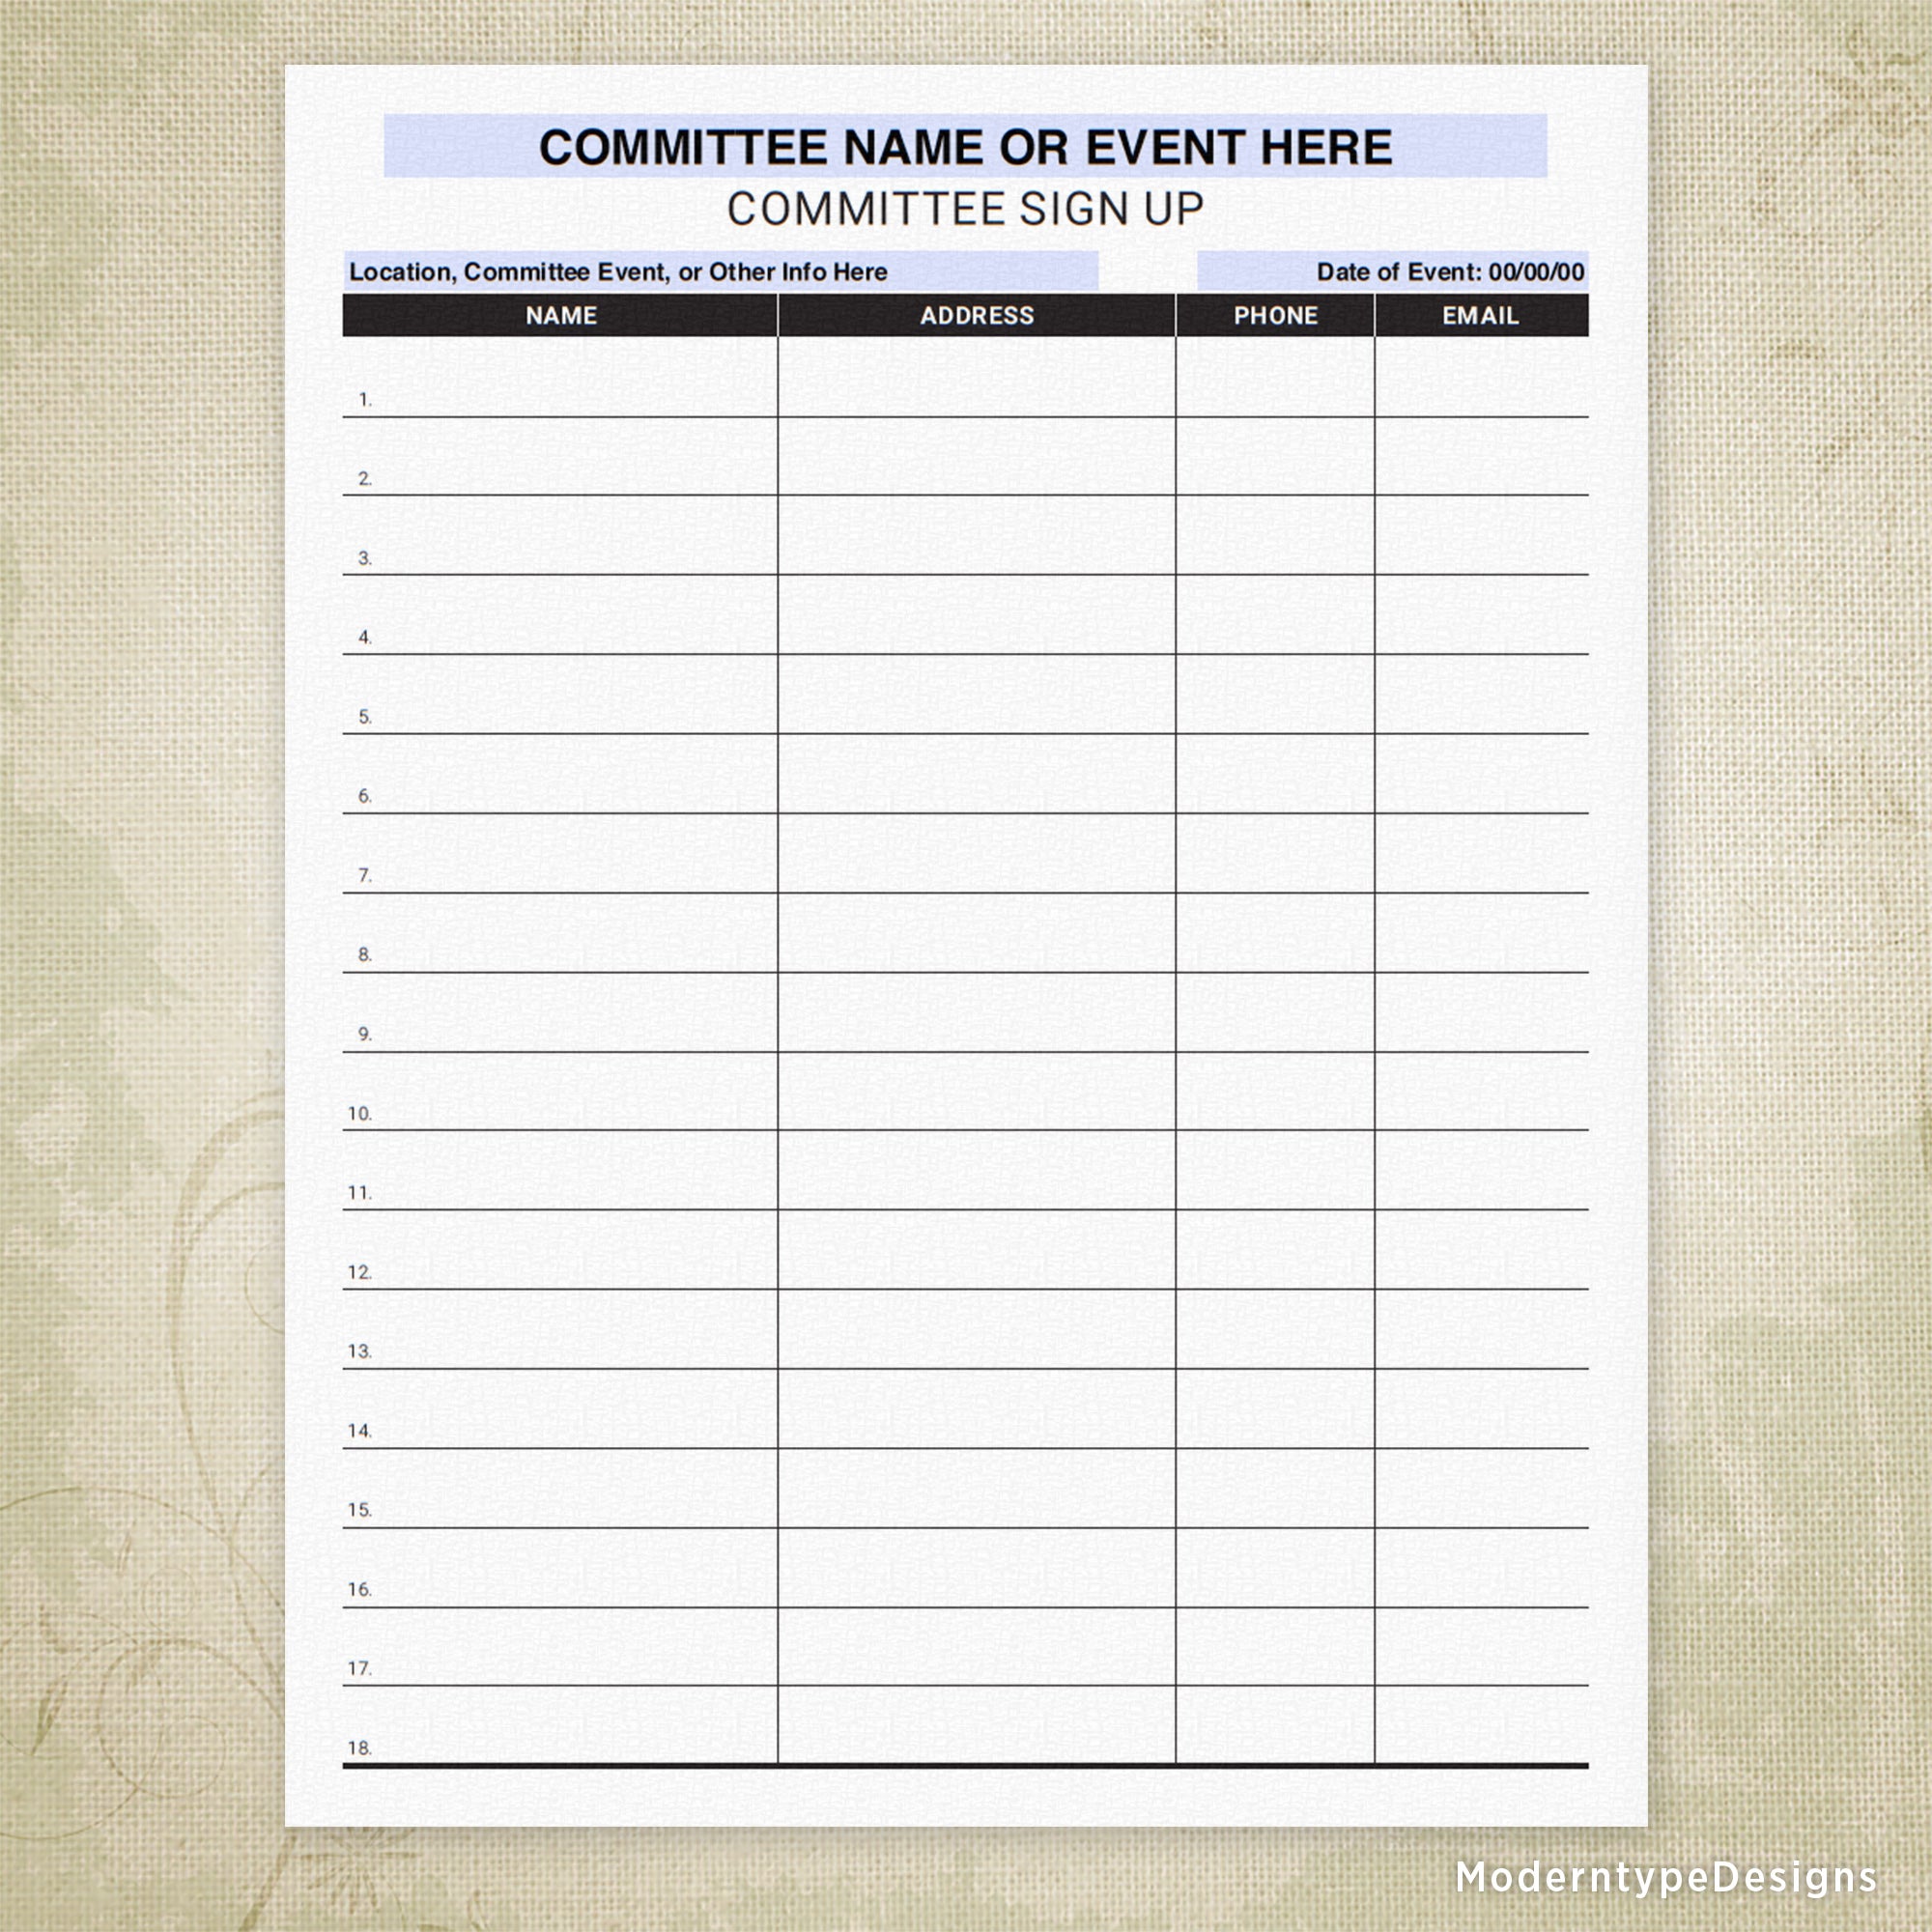 Committee Sign Up Printable Form, Personalized